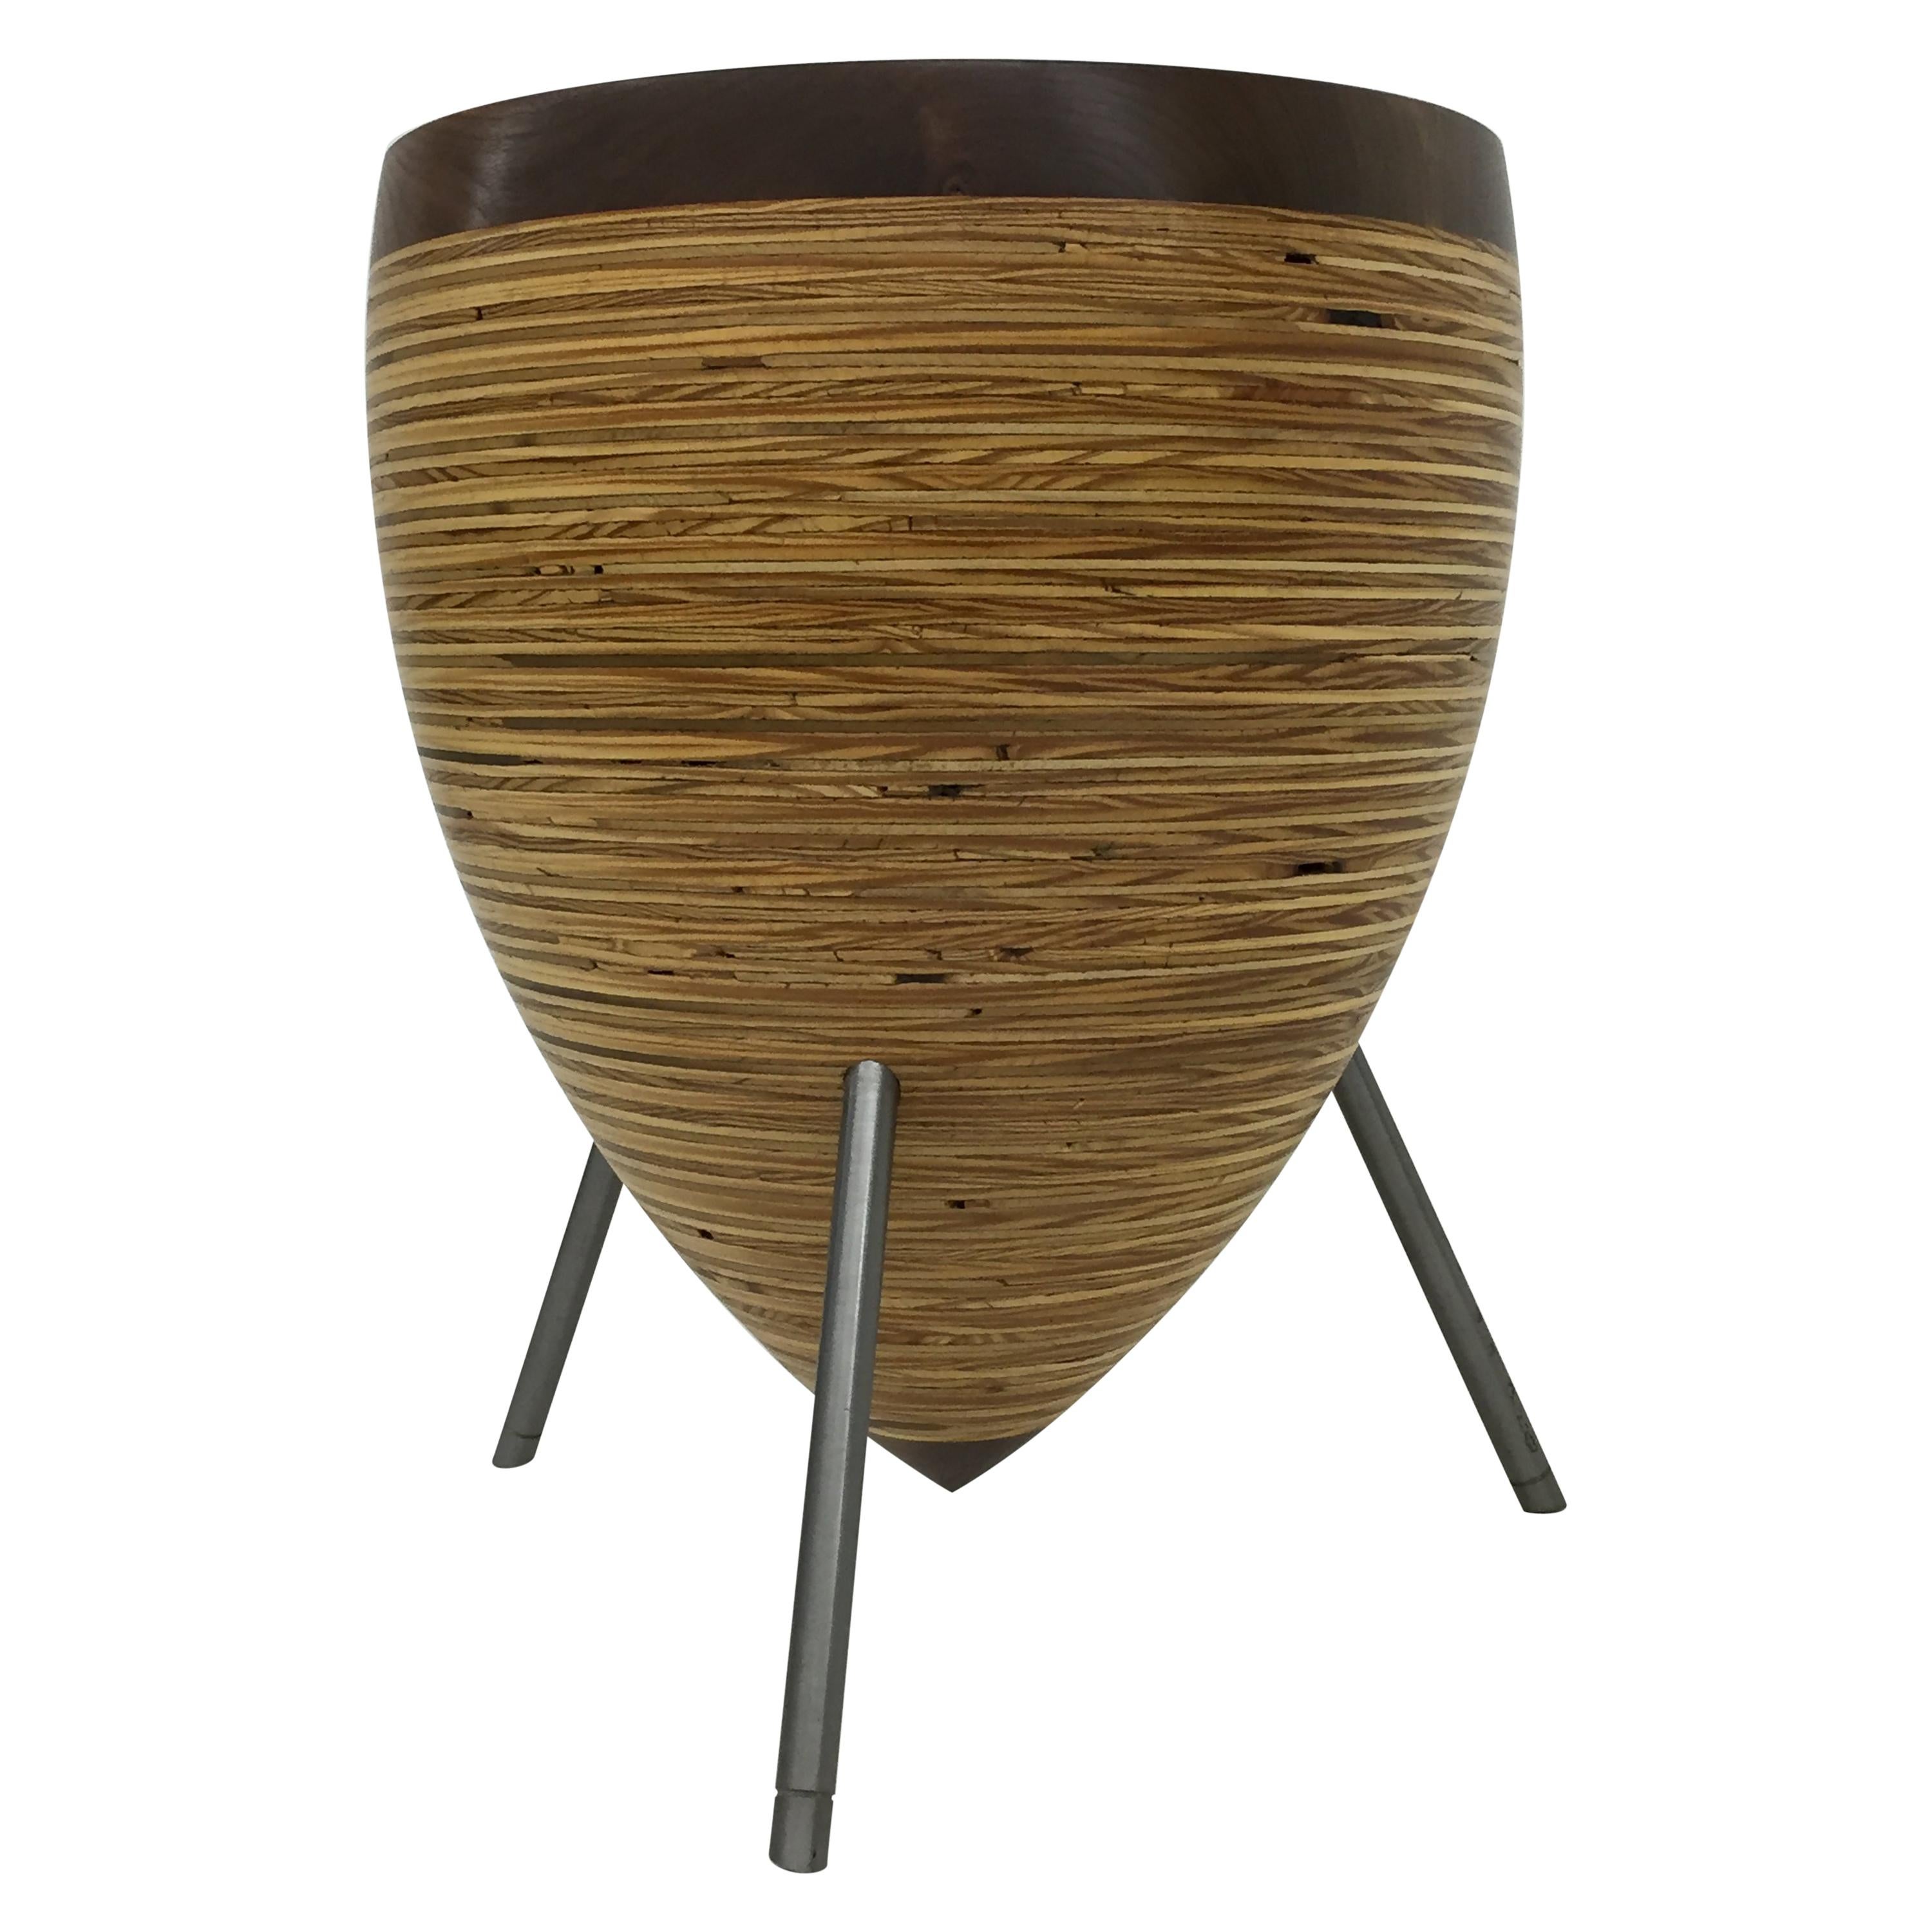 Modern Wood and Steel Stool and Table 'Med'